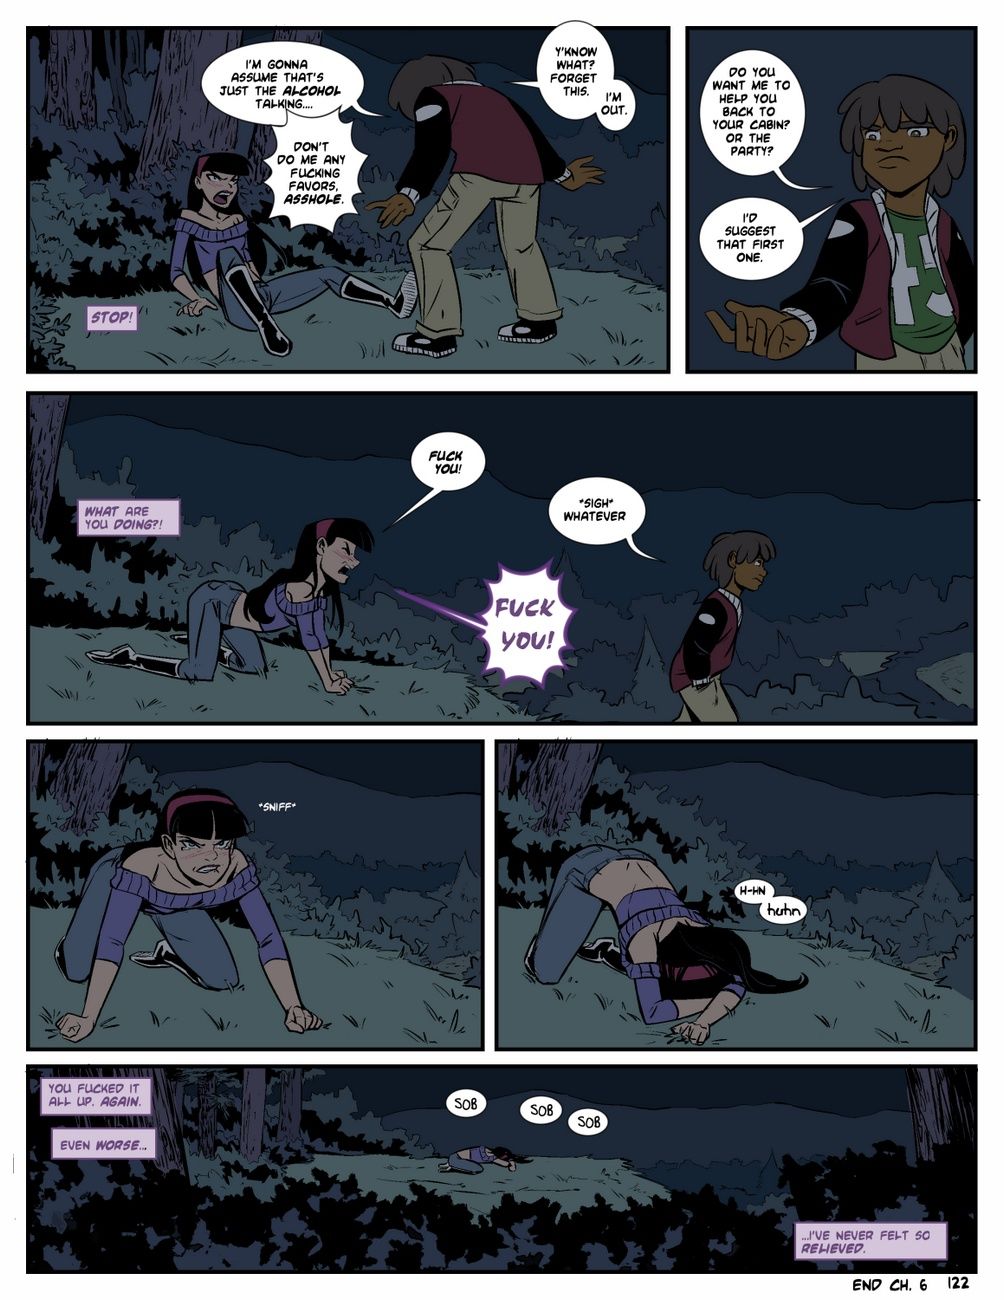 Camp Sherwood [Mr.D] (Ongoing) page 123